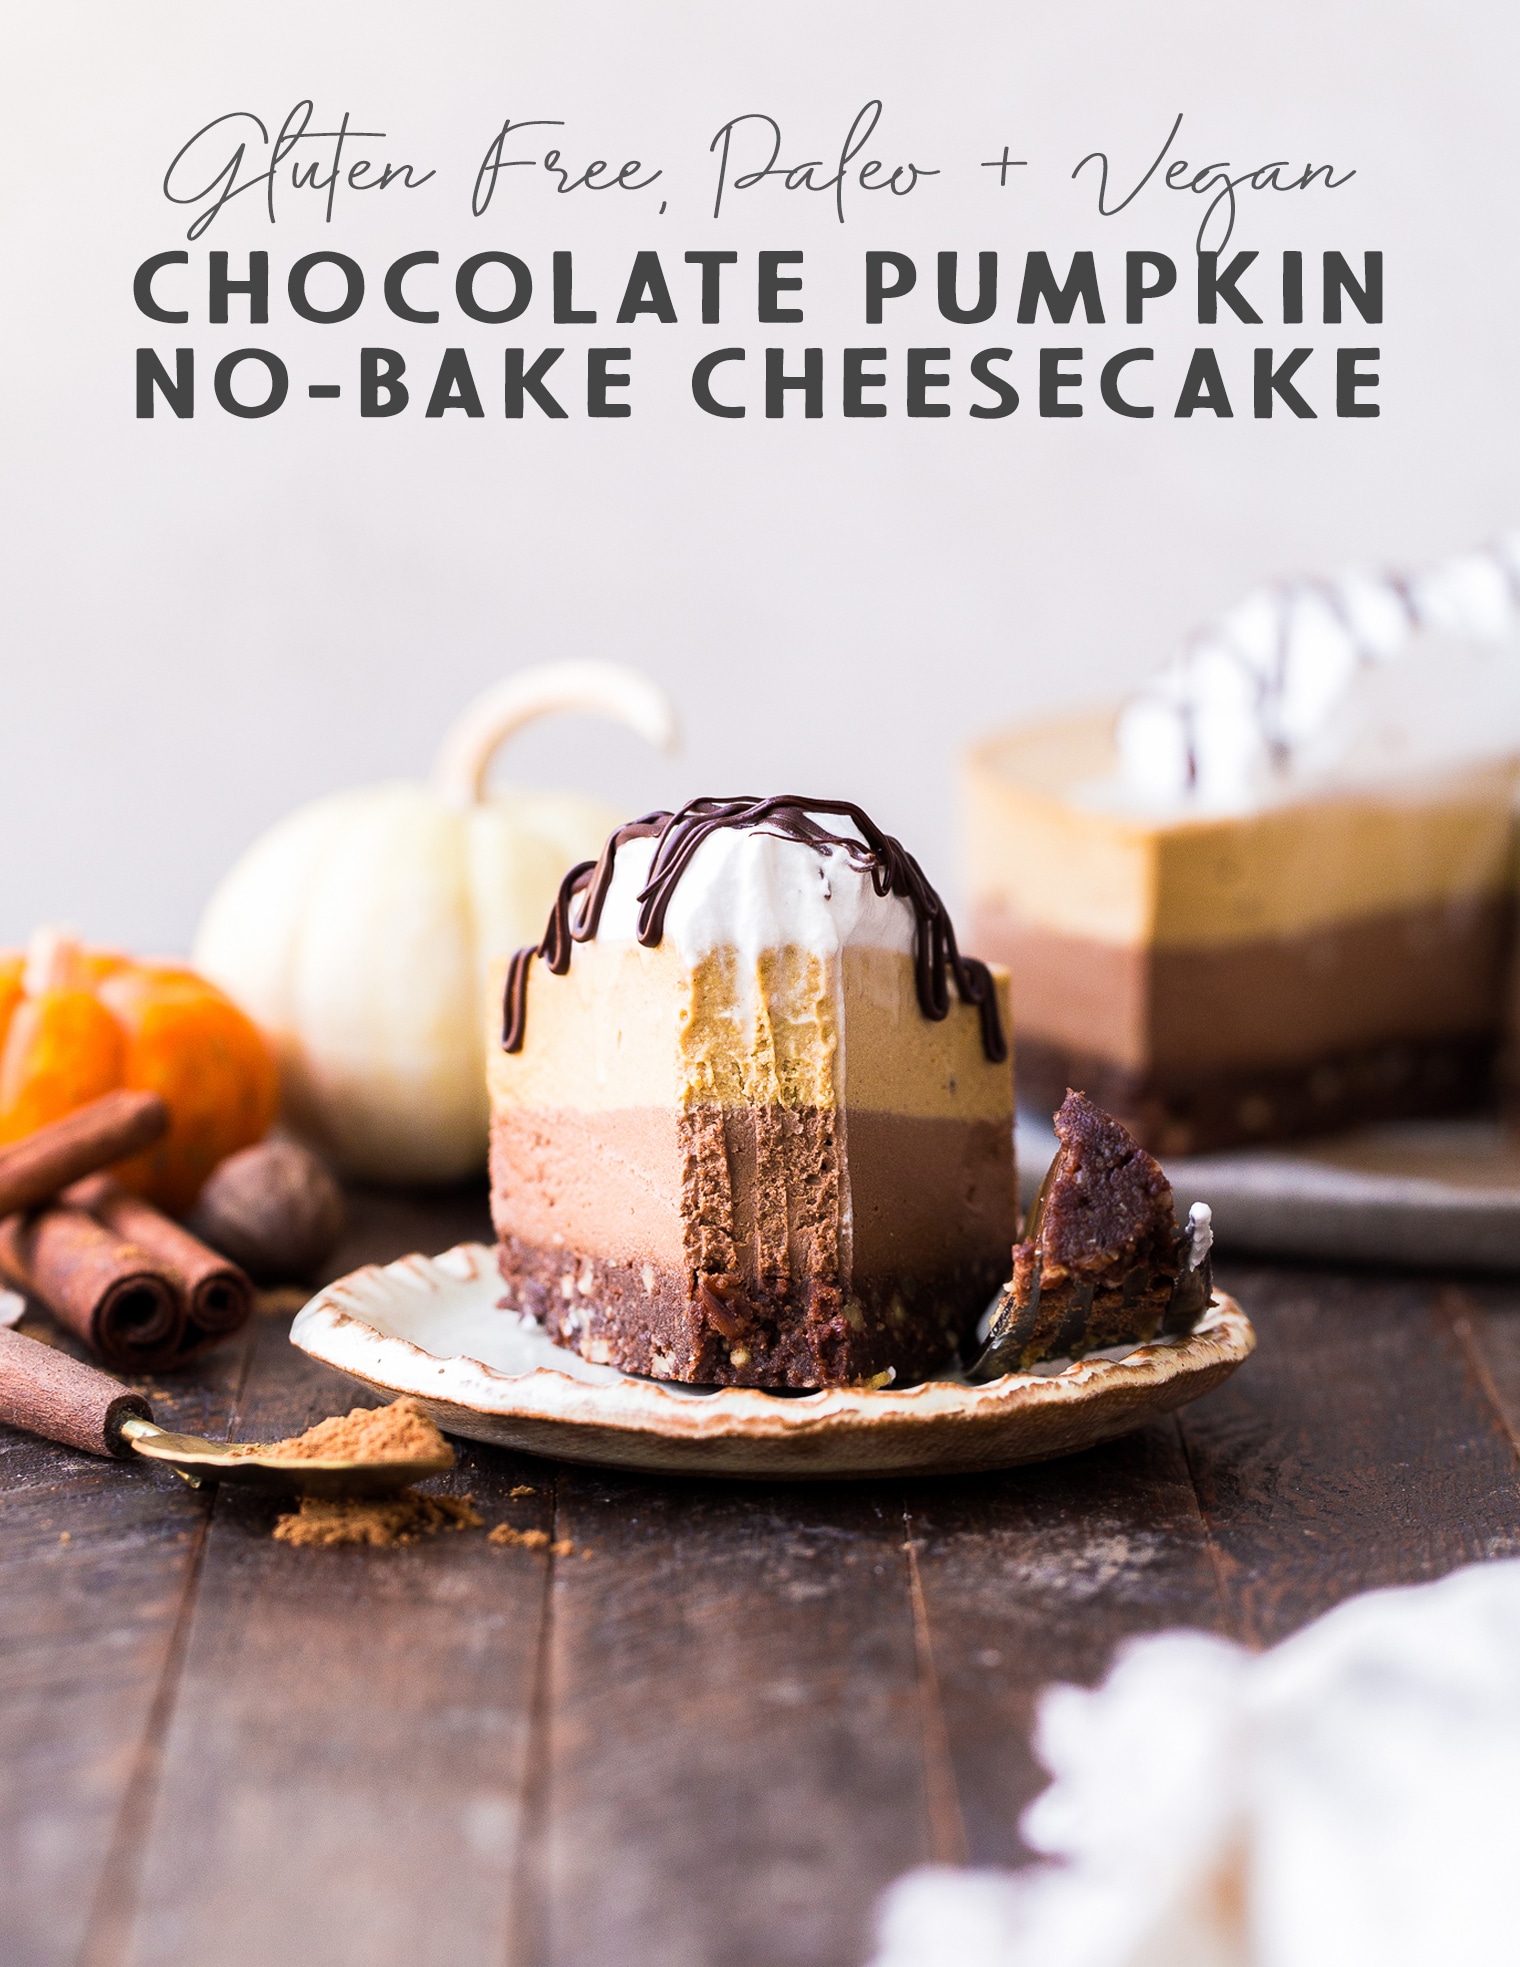 This No-Bake Chocolate Pumpkin Cheesecake has layers of chocolate cashew cheesecake and pumpkin spice cheesecake, on top of a chocolate date crust. This make-ahead raw dessert is perfect for the holidays.